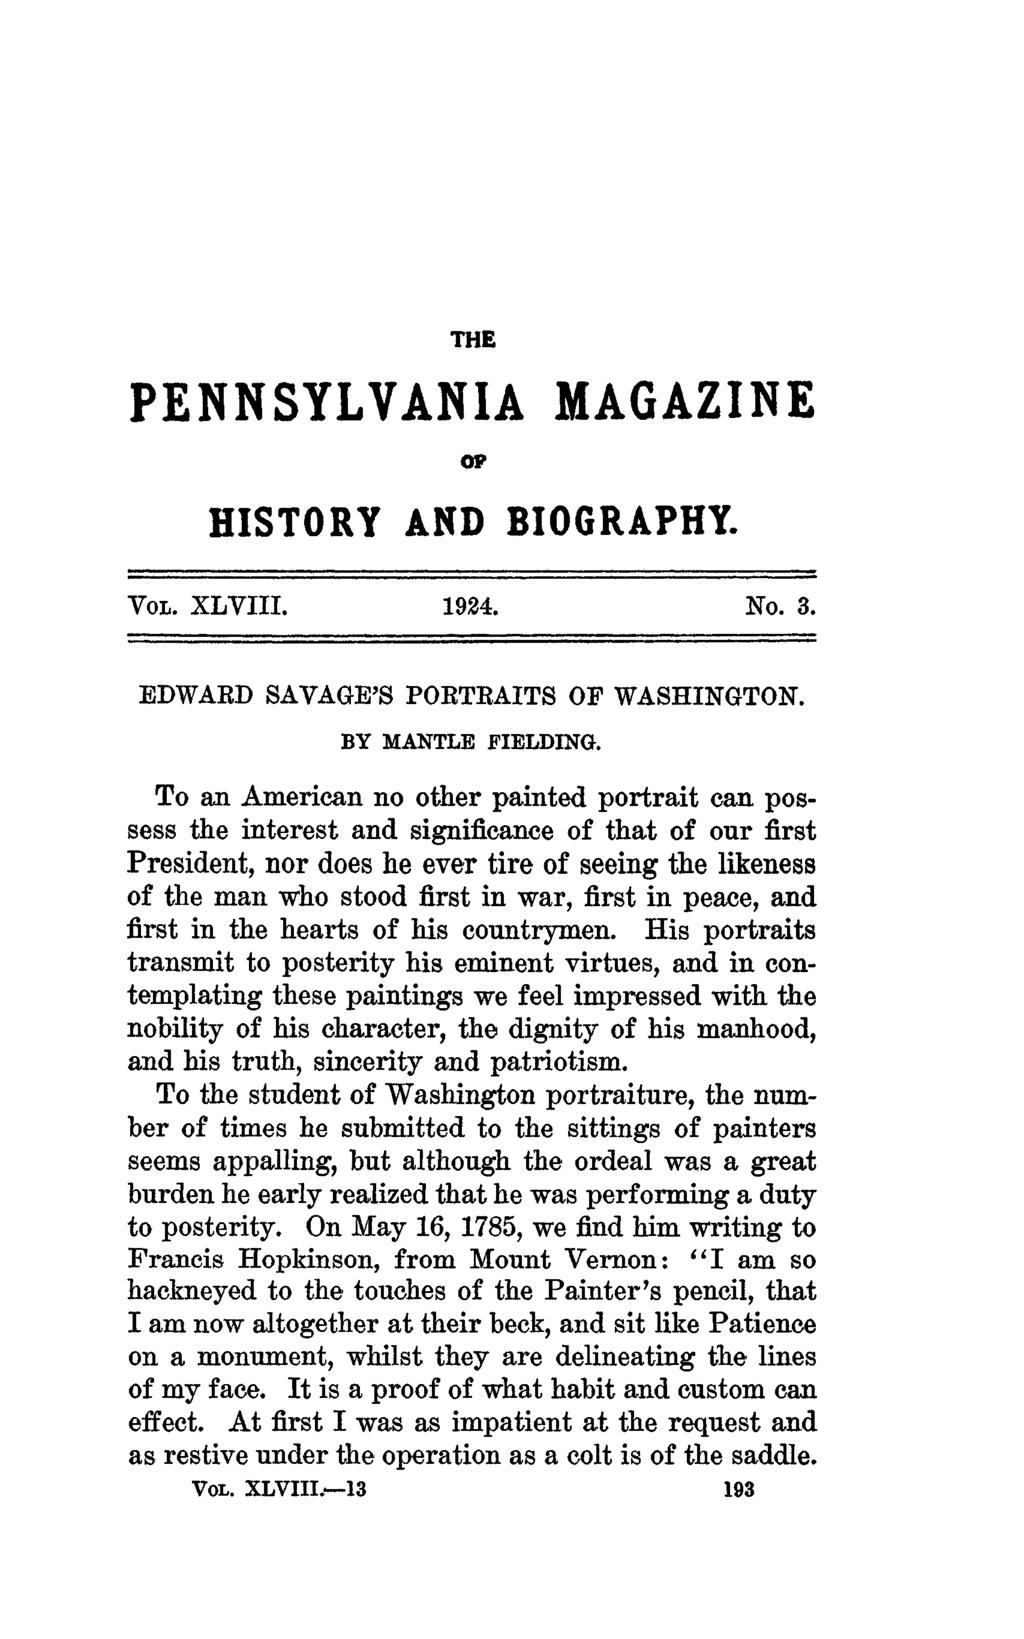 THE PENNSYLVANIA MAGAZINE OF HISTORY AND BIOGRAPHY. VOL. XLVIII. 1924. No. 3. EDWARD SAVAGE'S PORTRAITS OF WASHINGTON. BY MANTLE FIELDING.